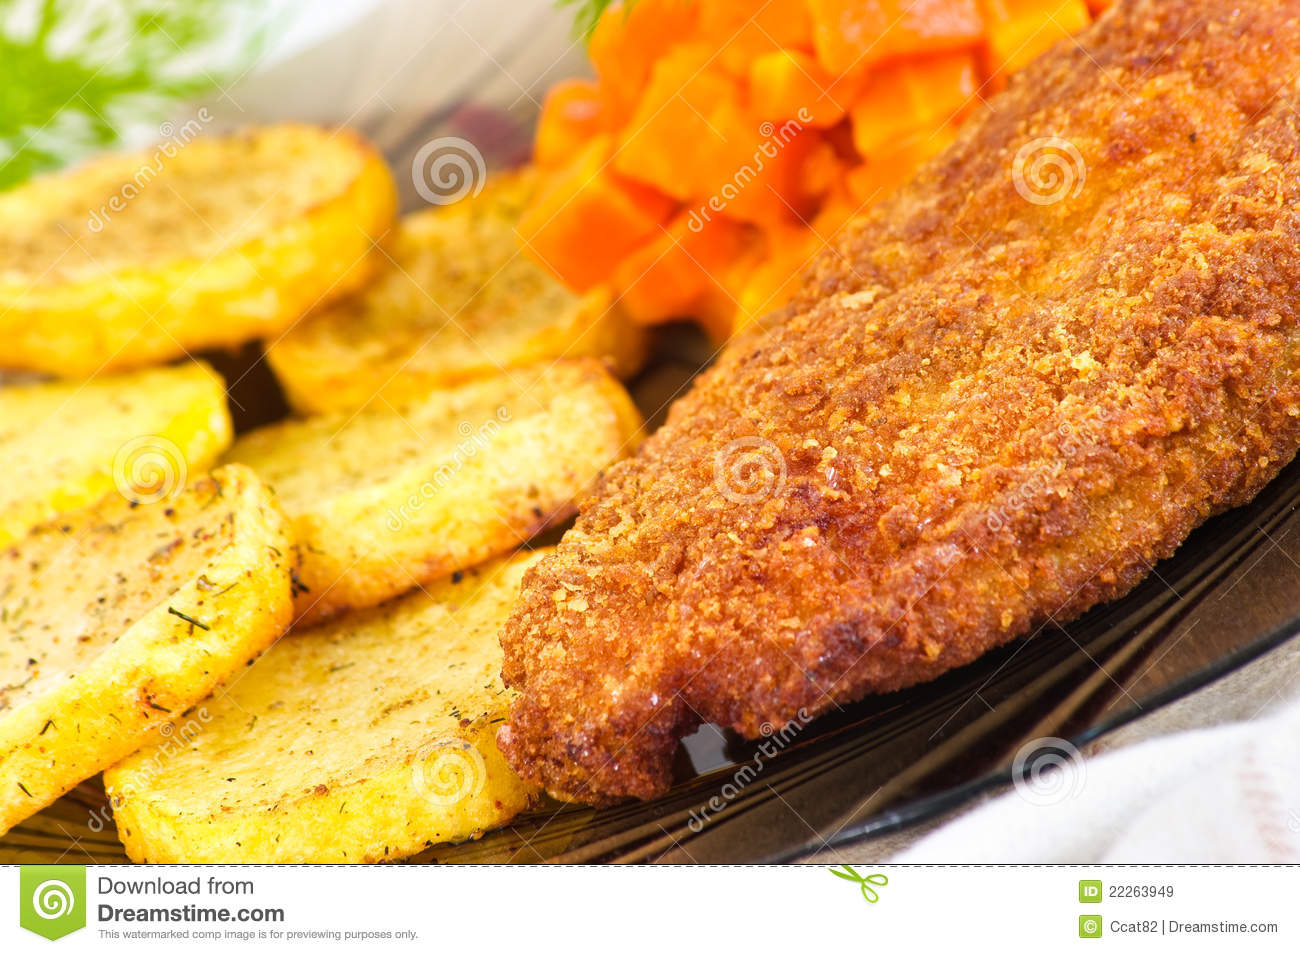 Parmesan Breaded Chicken Breast Royalty Free Stock Images   Image